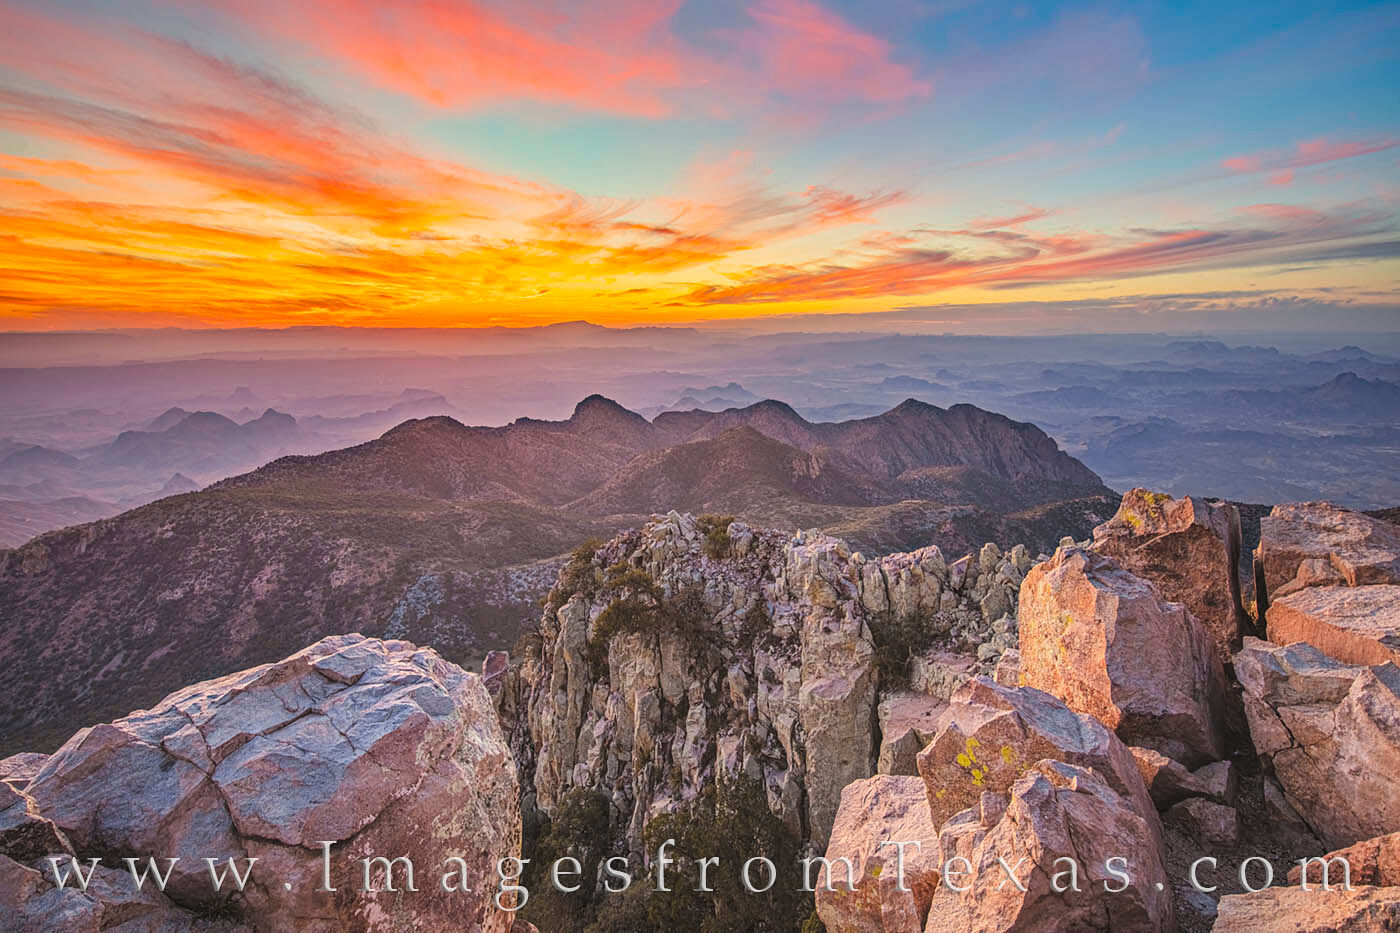 This view was the last photograph of what was an amazing hour atop Emory Peak, the highest point in Big Bend National Park. The...